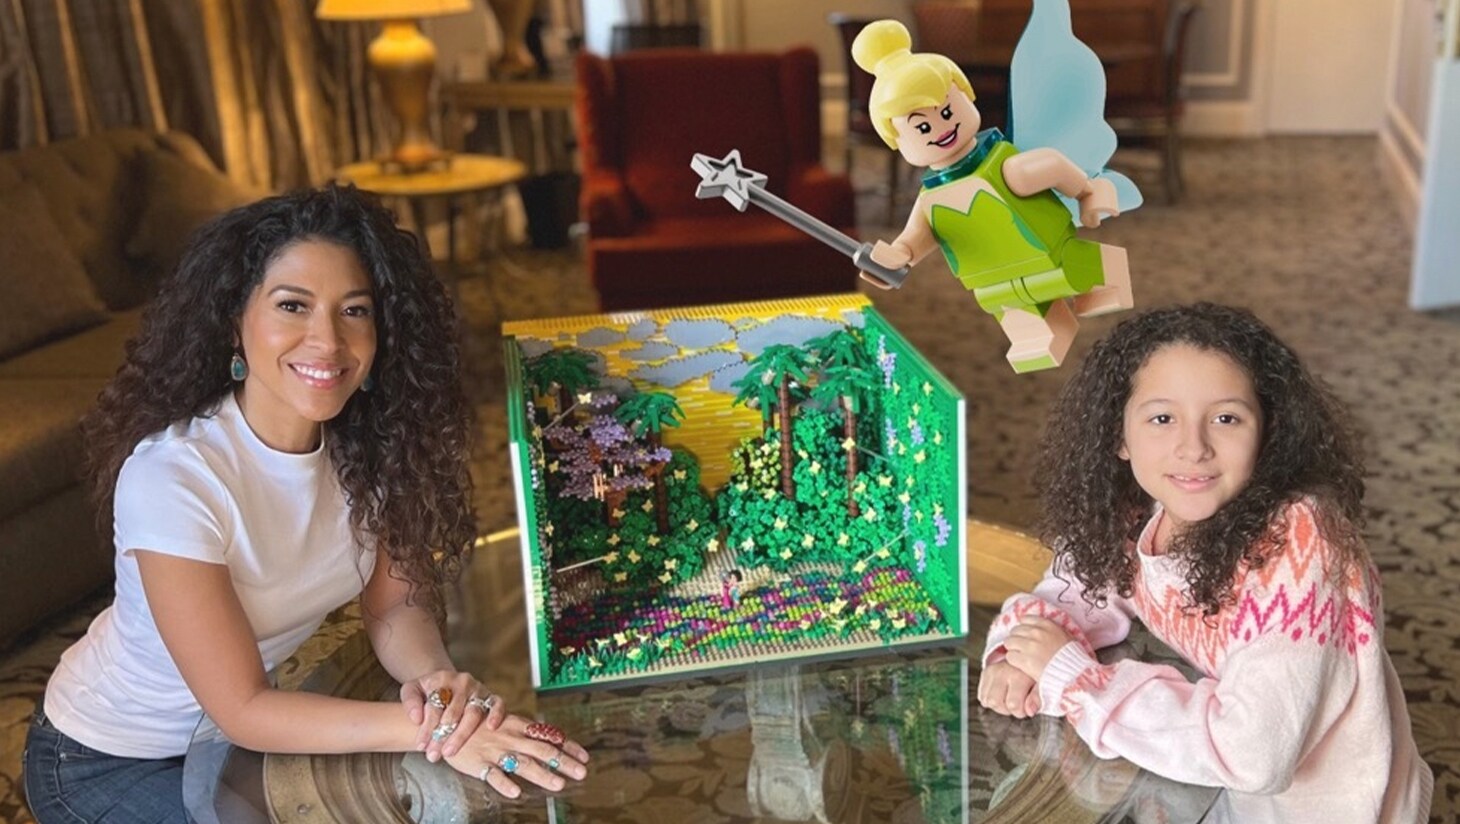 Image of a LEGO diorama on a table between a woman and a young girl. An image of a LEGO Tinkerbell is superimposed on the image.